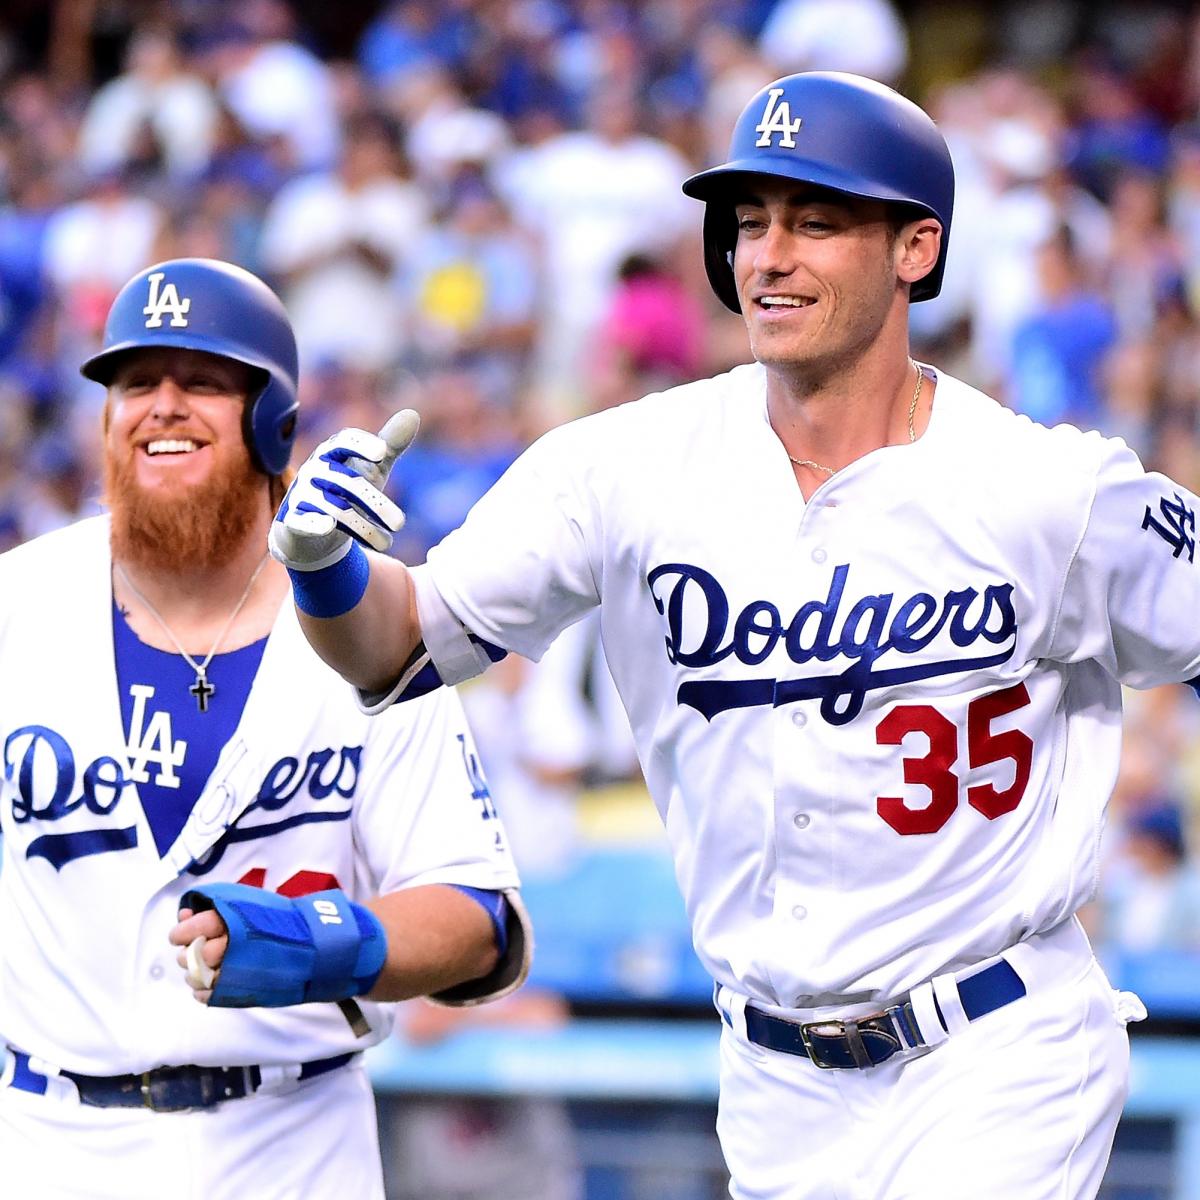 Cody Bellinger's Home Run on Tuesday Re-Wrote the Baseball Record Books